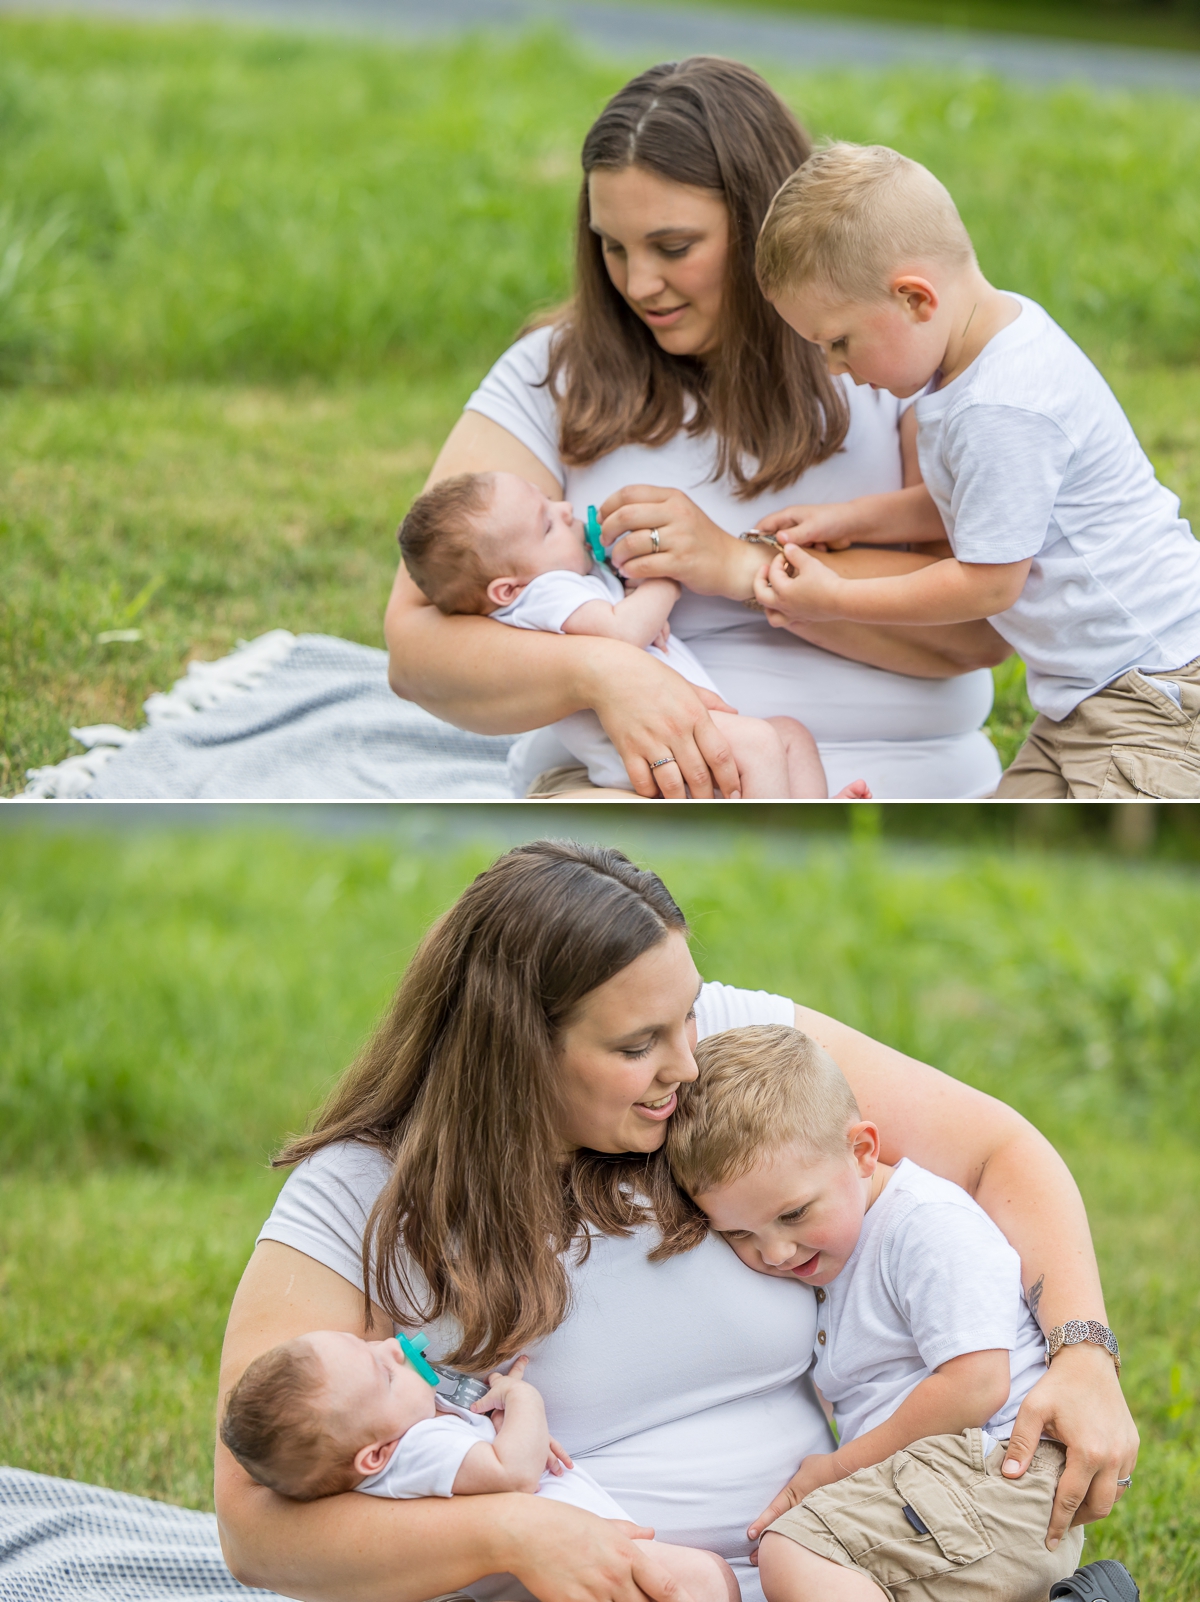 Regina with her two sons on a blanket, trying to calm Waylon down while Levi helps during a Northern Virginia newborn photography session.